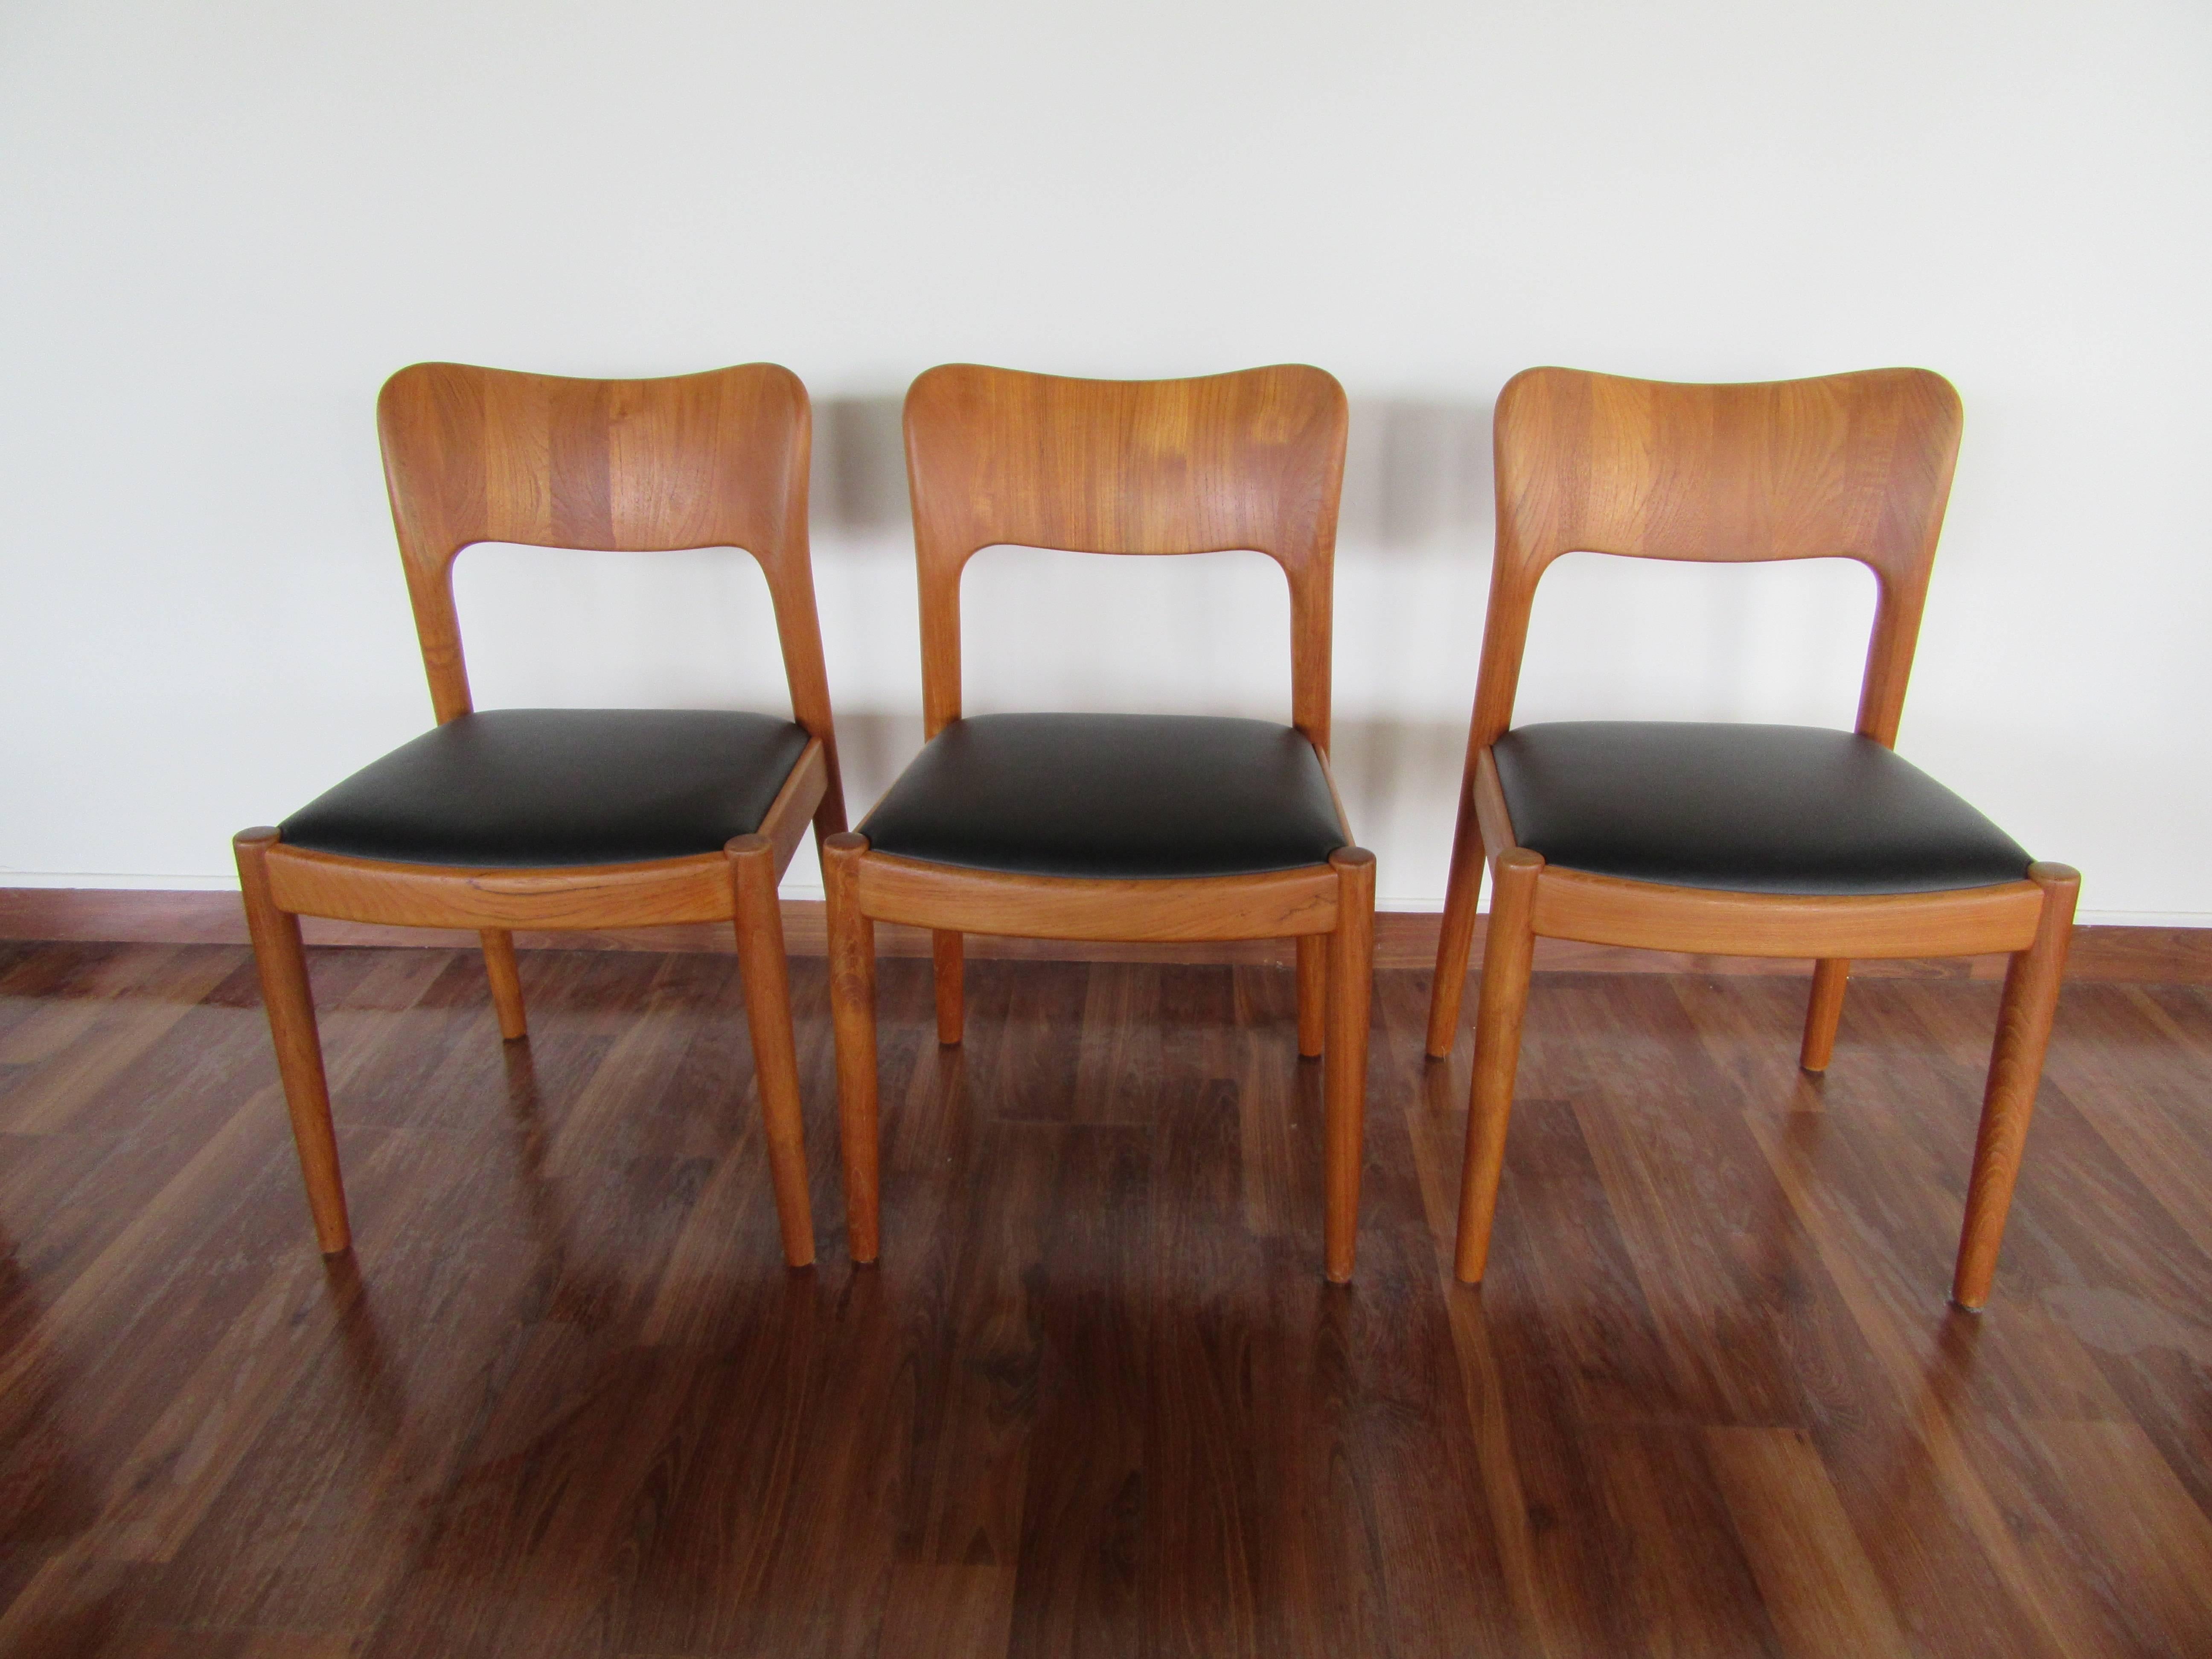 Beautiful chunky teak chairs upholstered in leather, manufactured by Koefoed Hornslet. Set of three.